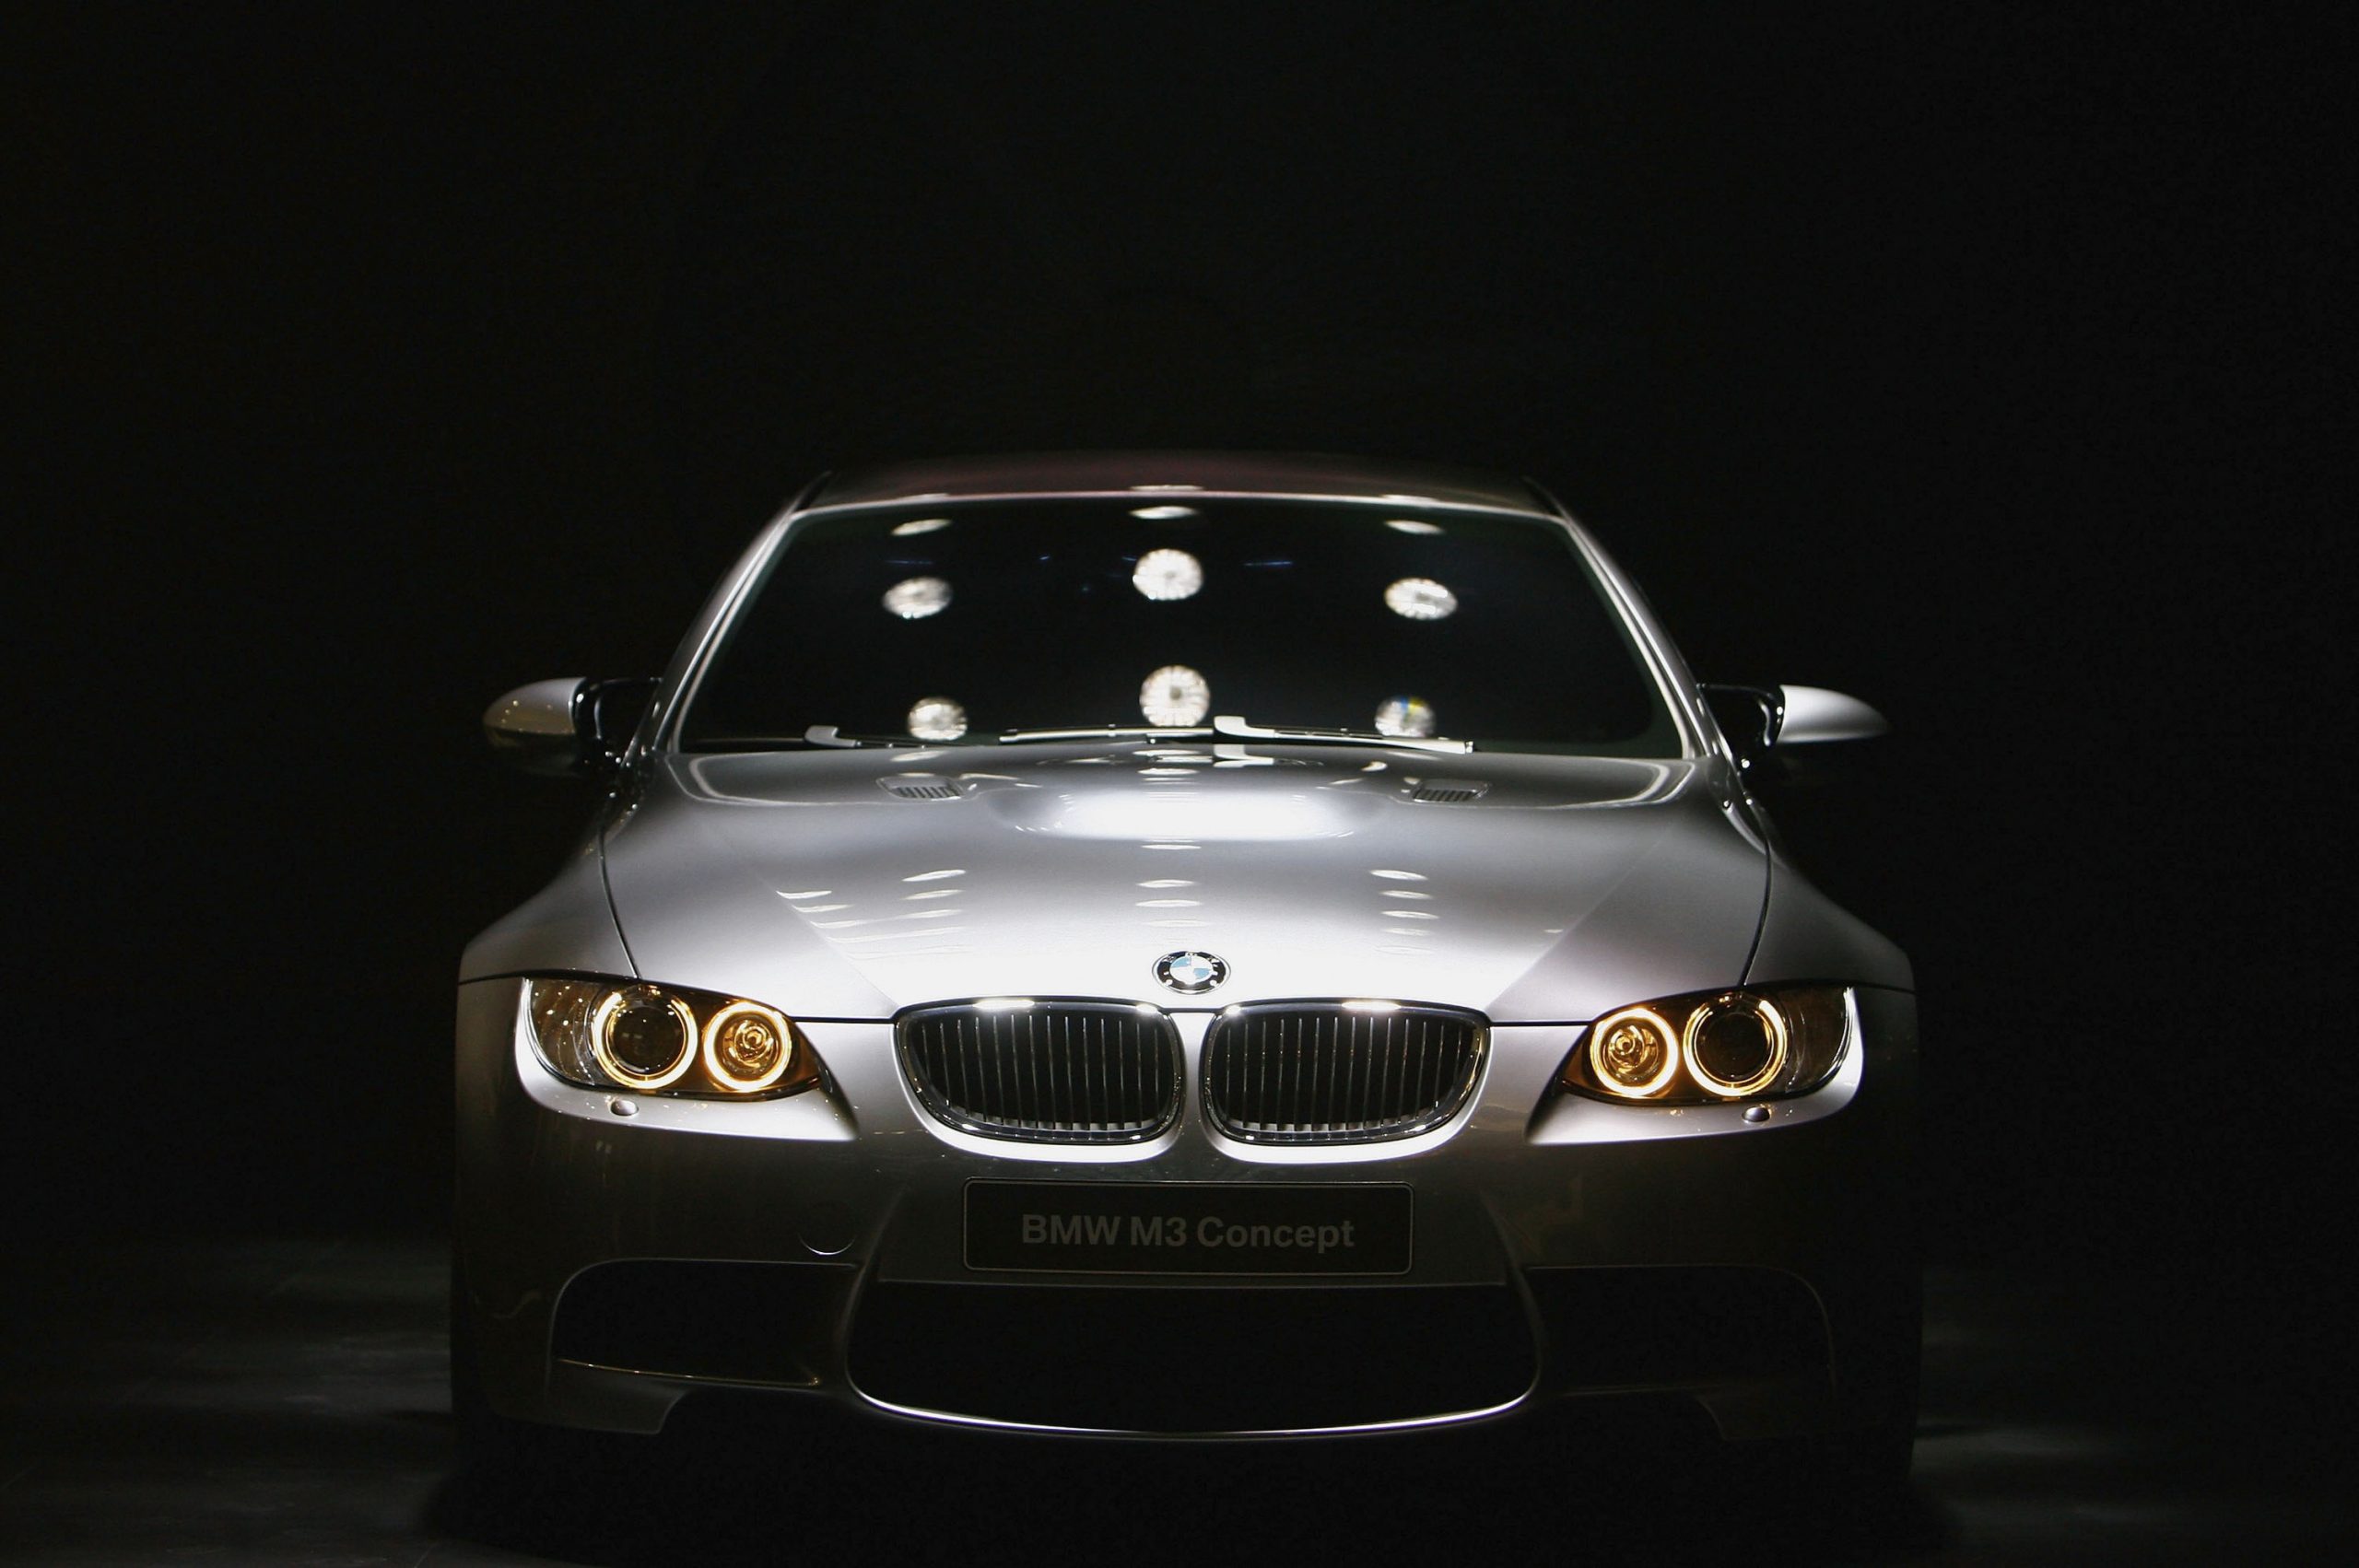 A silver BMW E92 M3 shot from the front in shadows